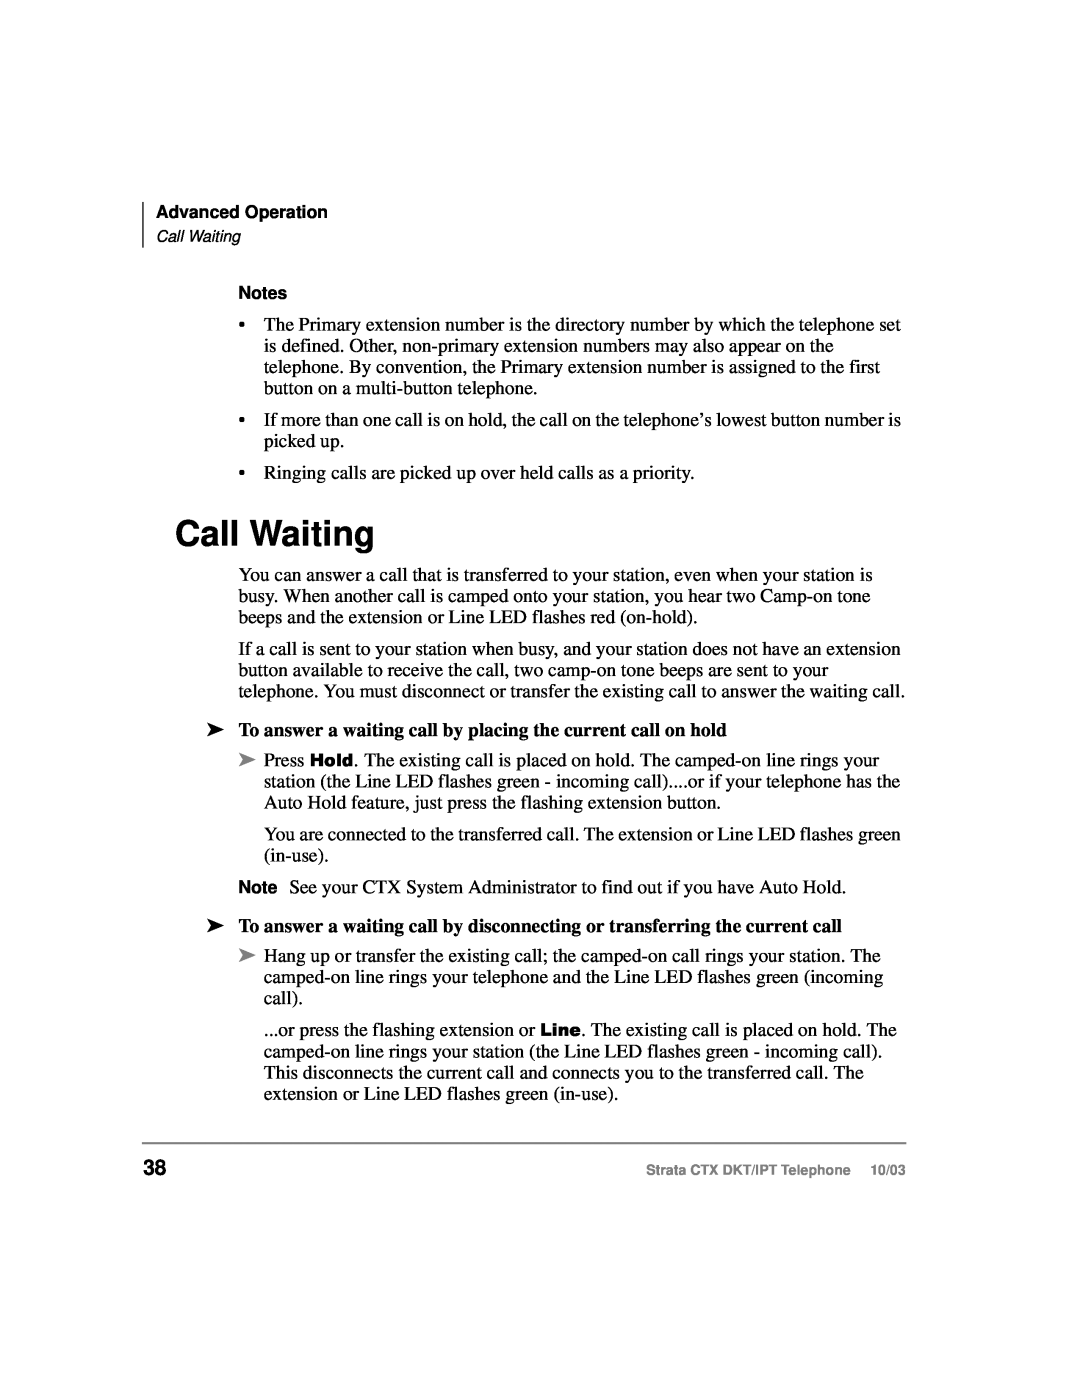 Toshiba IPT, DKT manual Call Waiting, To answer a waiting call by placing the current call on hold 